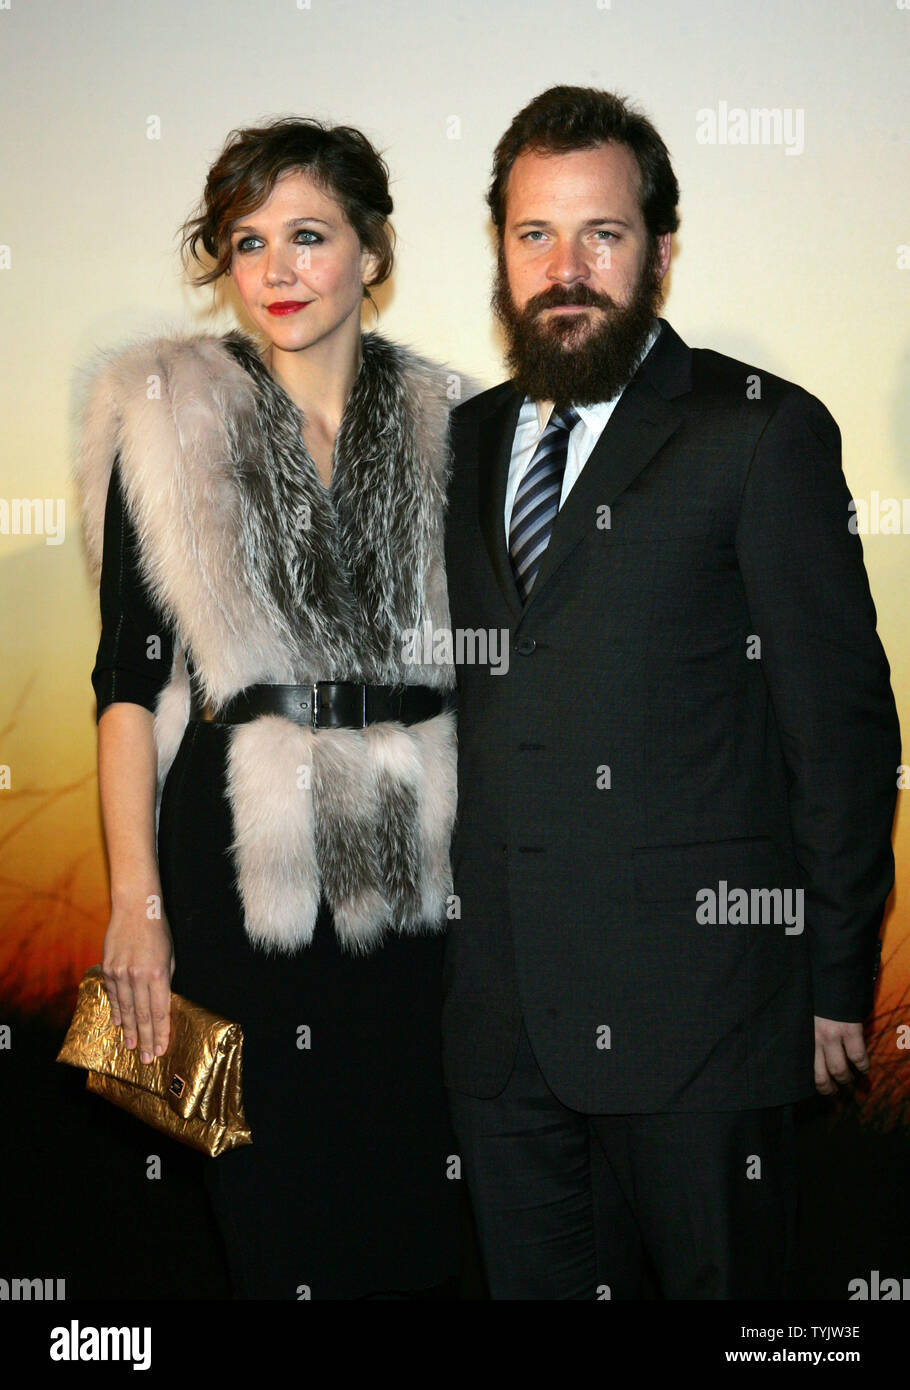 Maggie Gyllenhaal and husband Peter Sarsgaard arrive at the MoMA Film Benefit tribute to Baz Luhrmann at the Museum of Modern Art in New York on November 10, 2008.  (UPI Photo/Laura Cavanaugh) Stock Photo